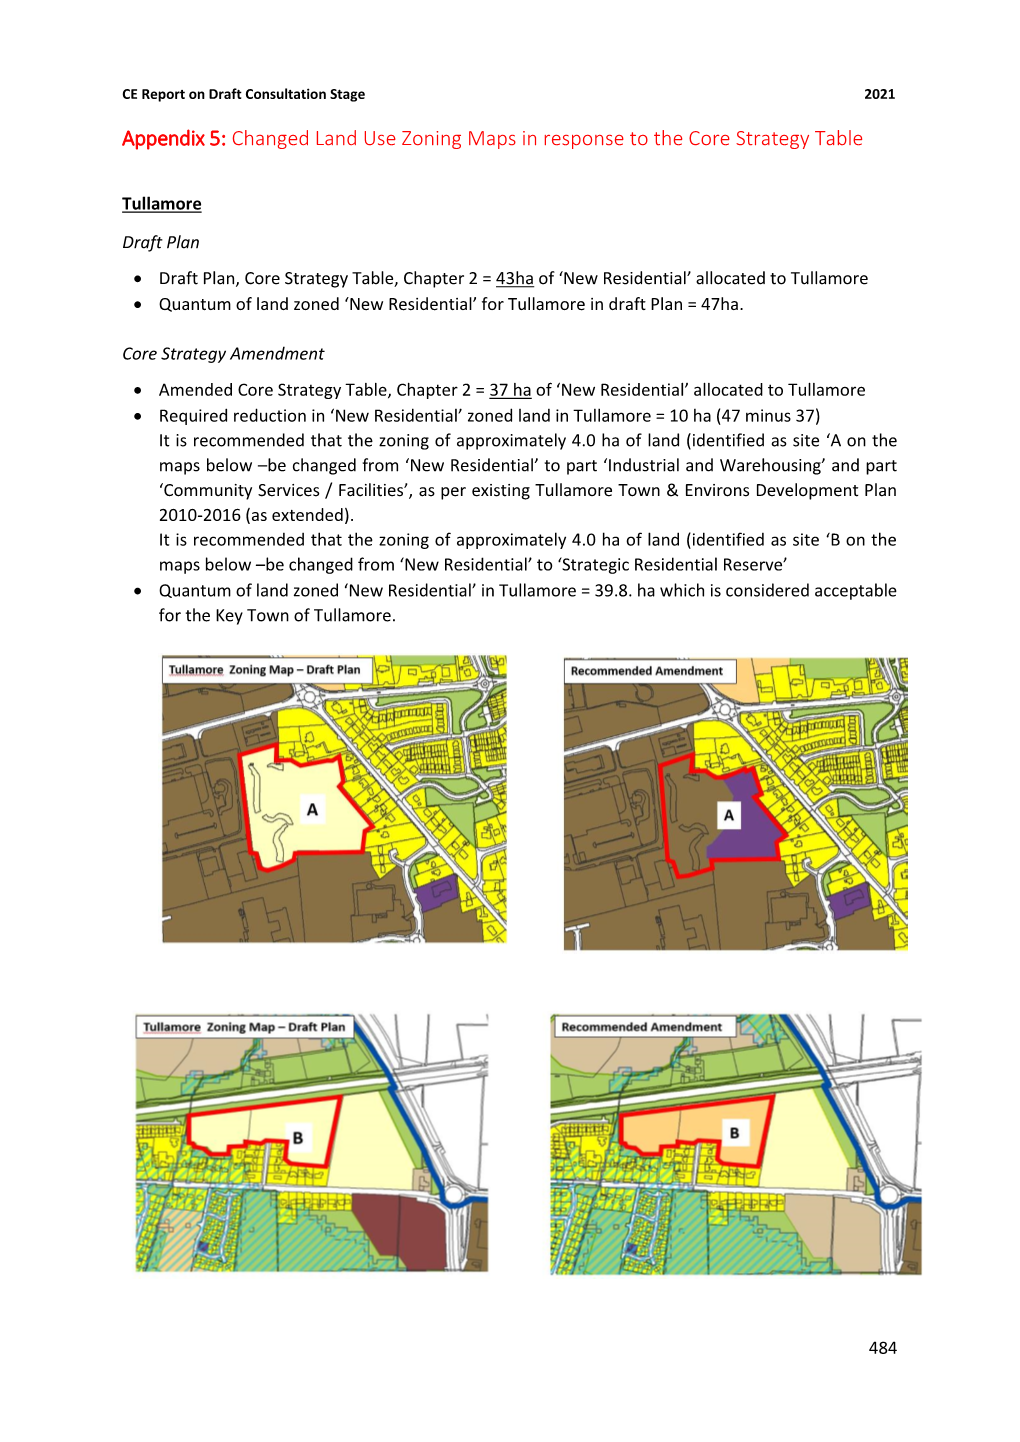 Appendix 5: Changed Land Use Zoning Maps in Response to the Core Strategy Table